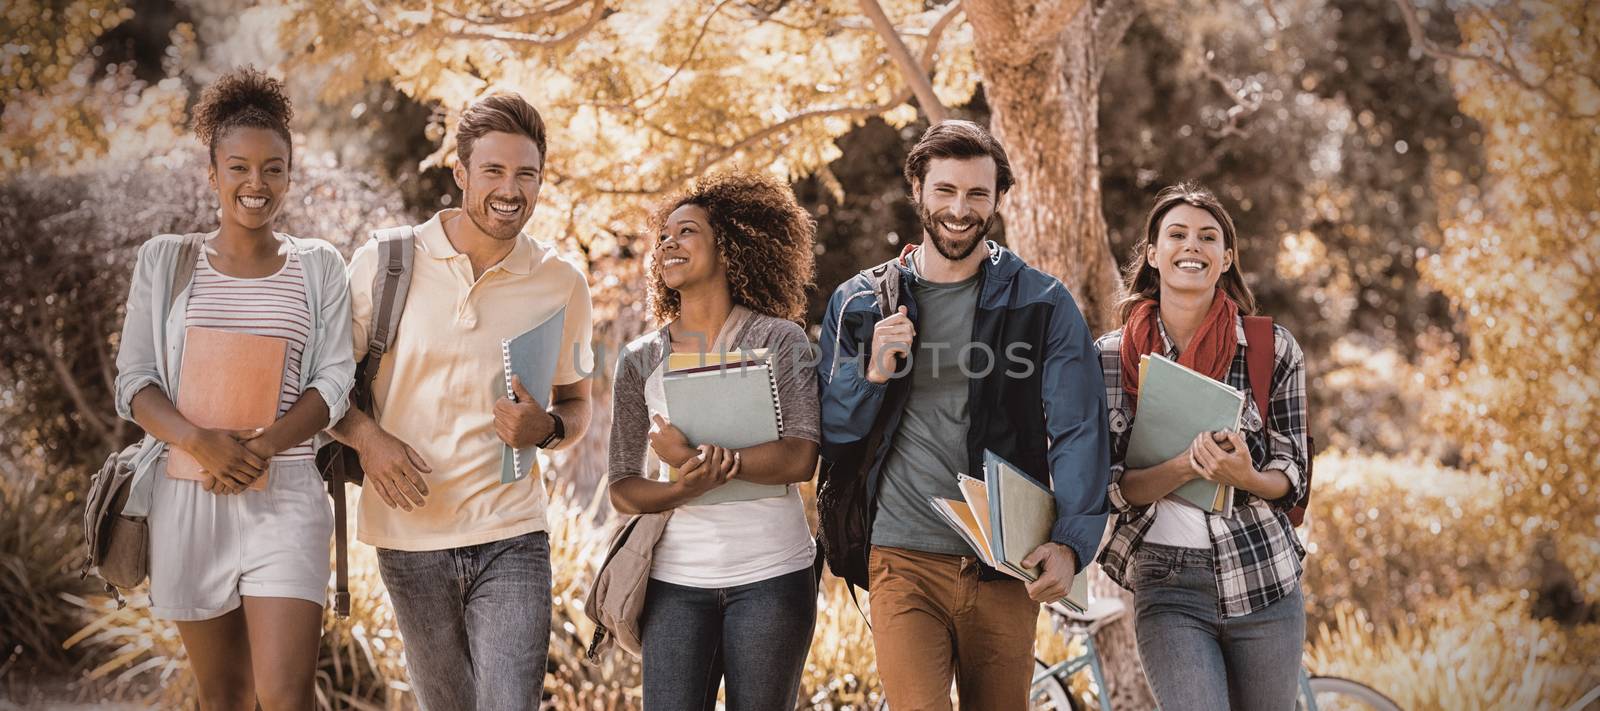 Group of college friends walking in campus